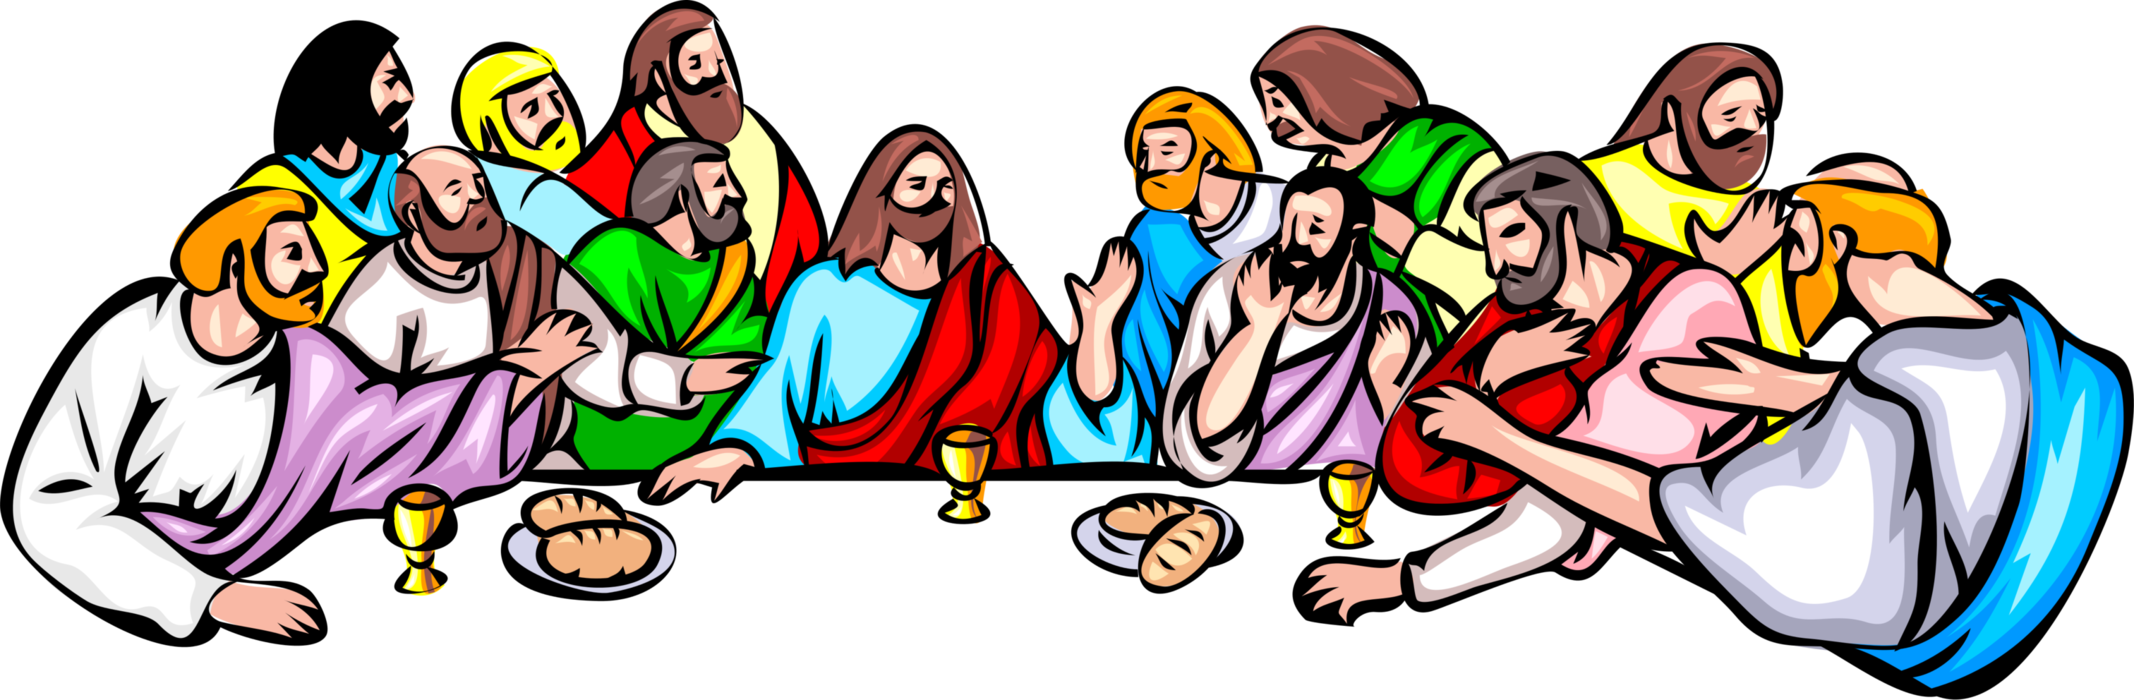 Vector Illustration of Jesus Christ with Twelve Apostle Disciples at The Last Supper